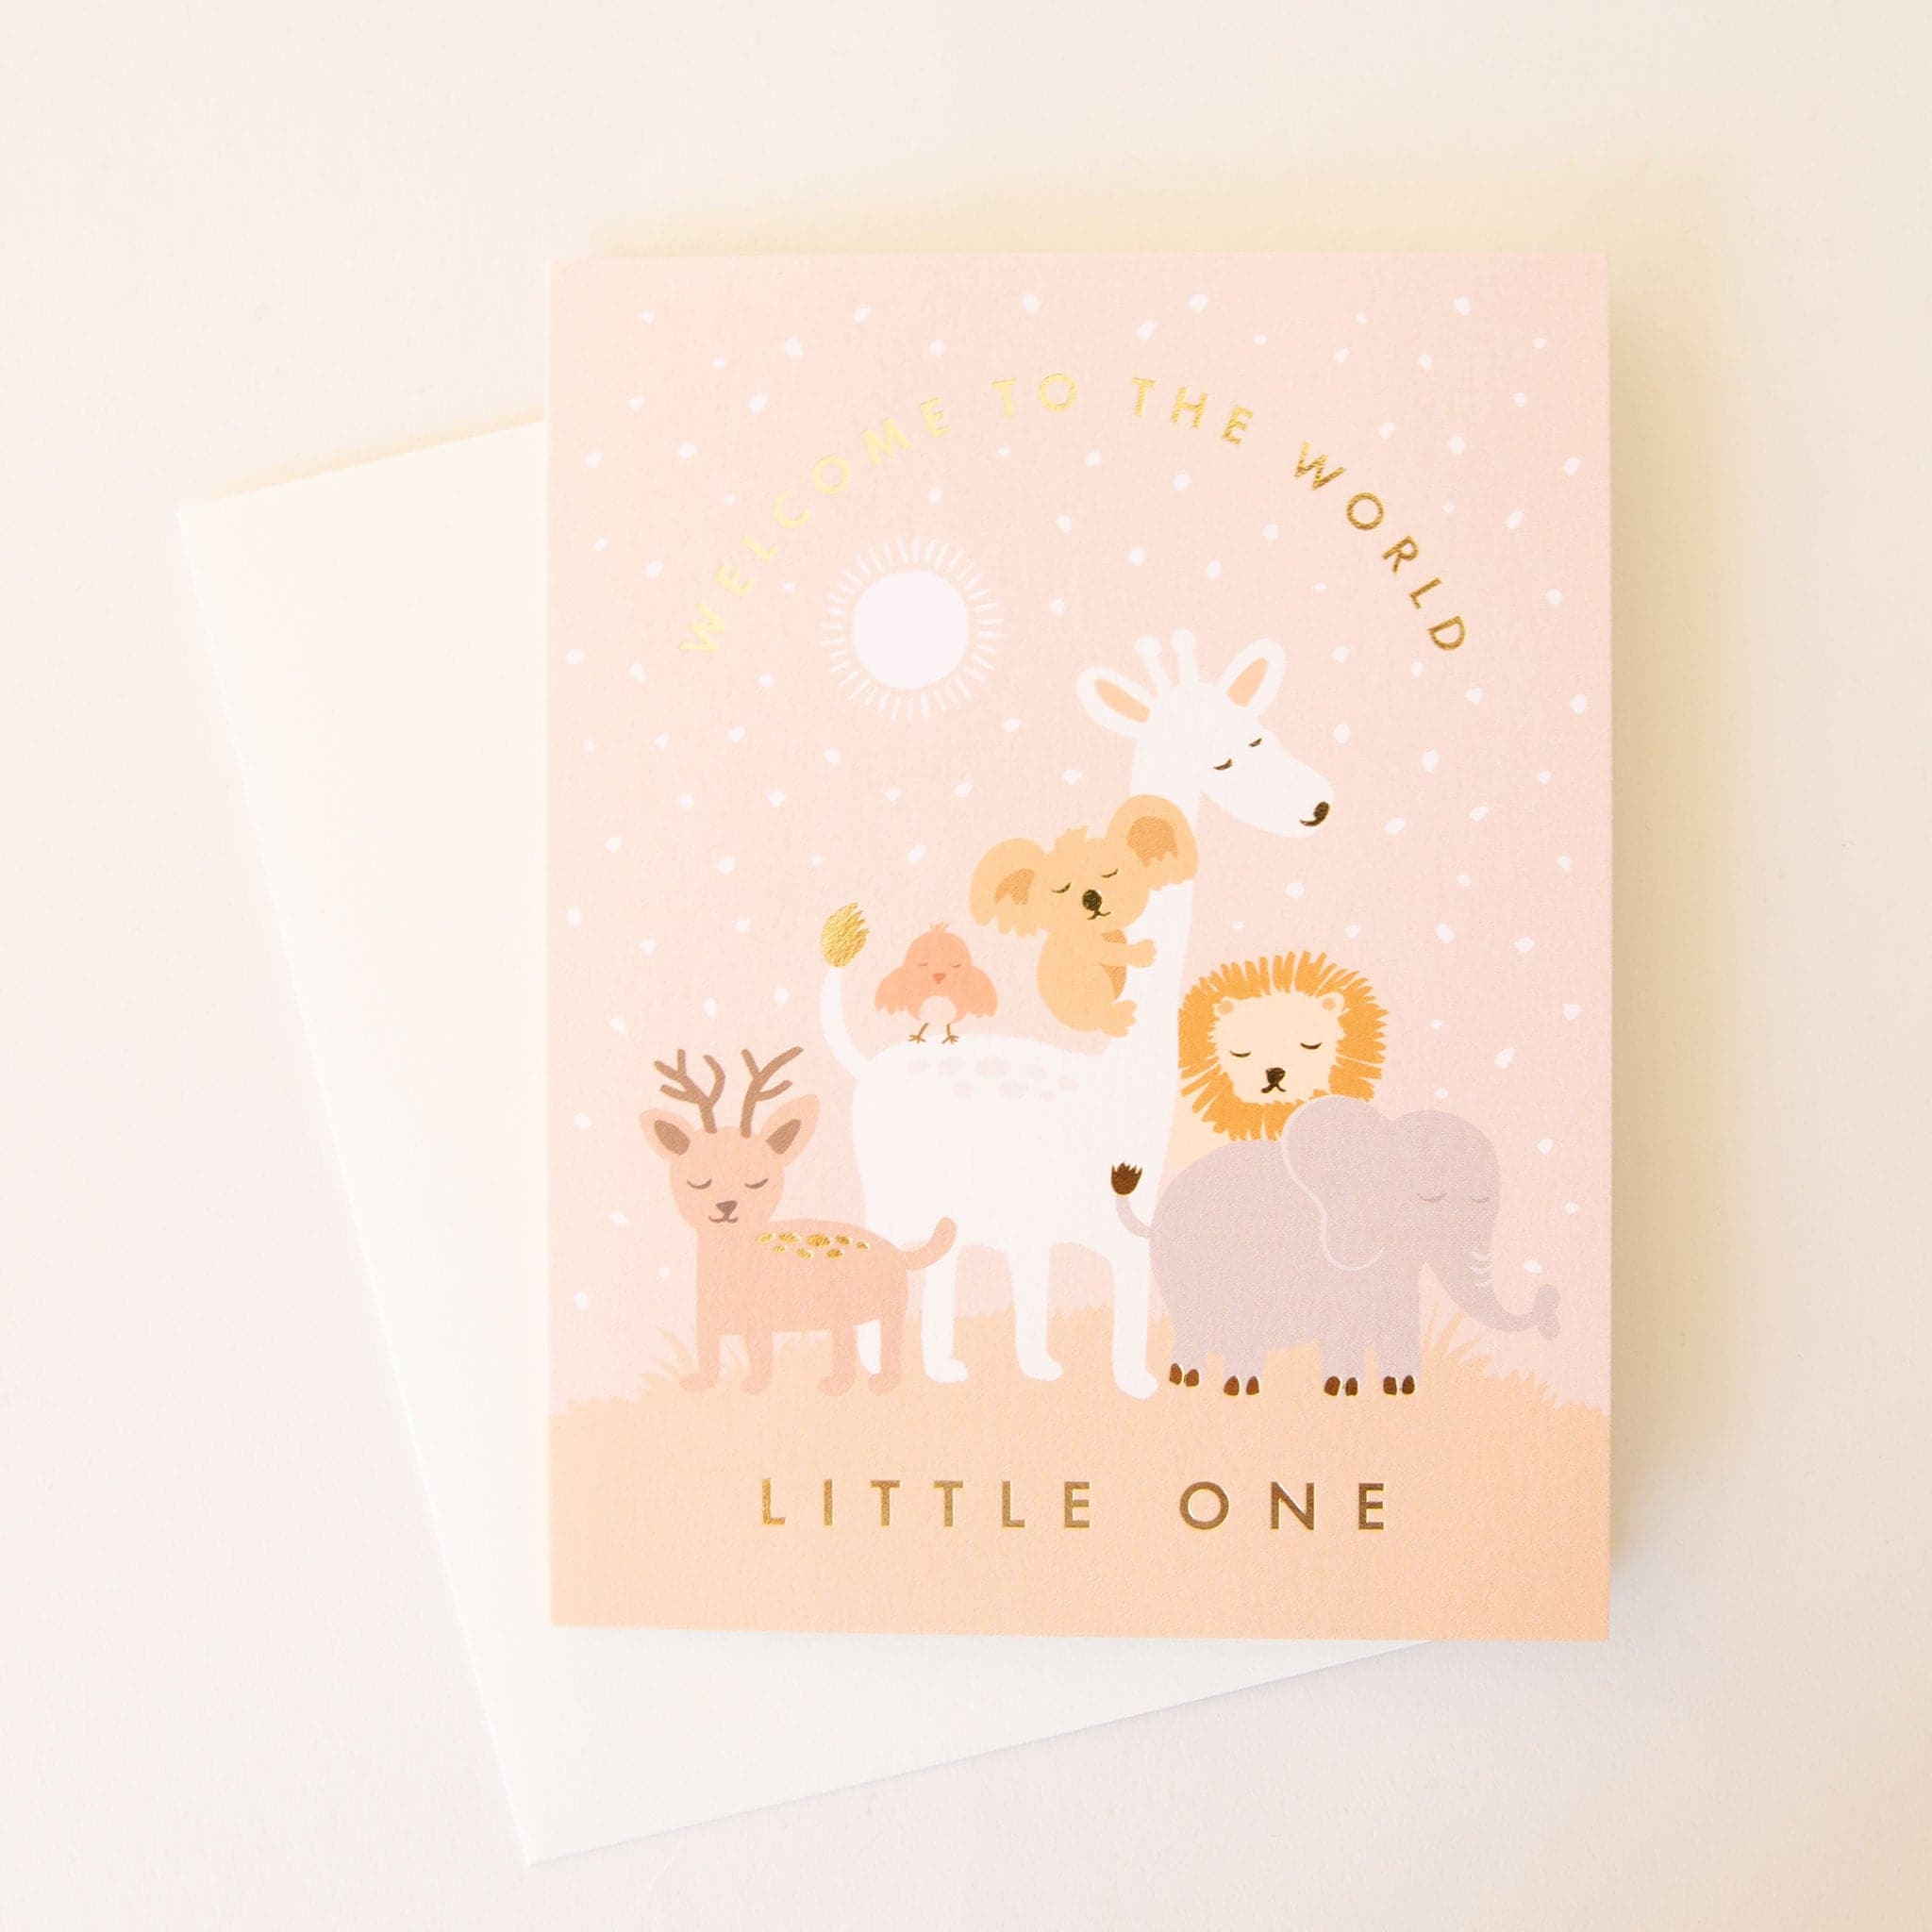 Soft pink card filled with a herd of peaceful animals including a dear, giraffe, koala and more. The text &#39;Welcome to the world&#39; curves above them in gold foil across a star filled sky. Below the scene reads &#39;little one&#39; in gold foil capital lettering. The card is accompanied by a solid white envelope. 